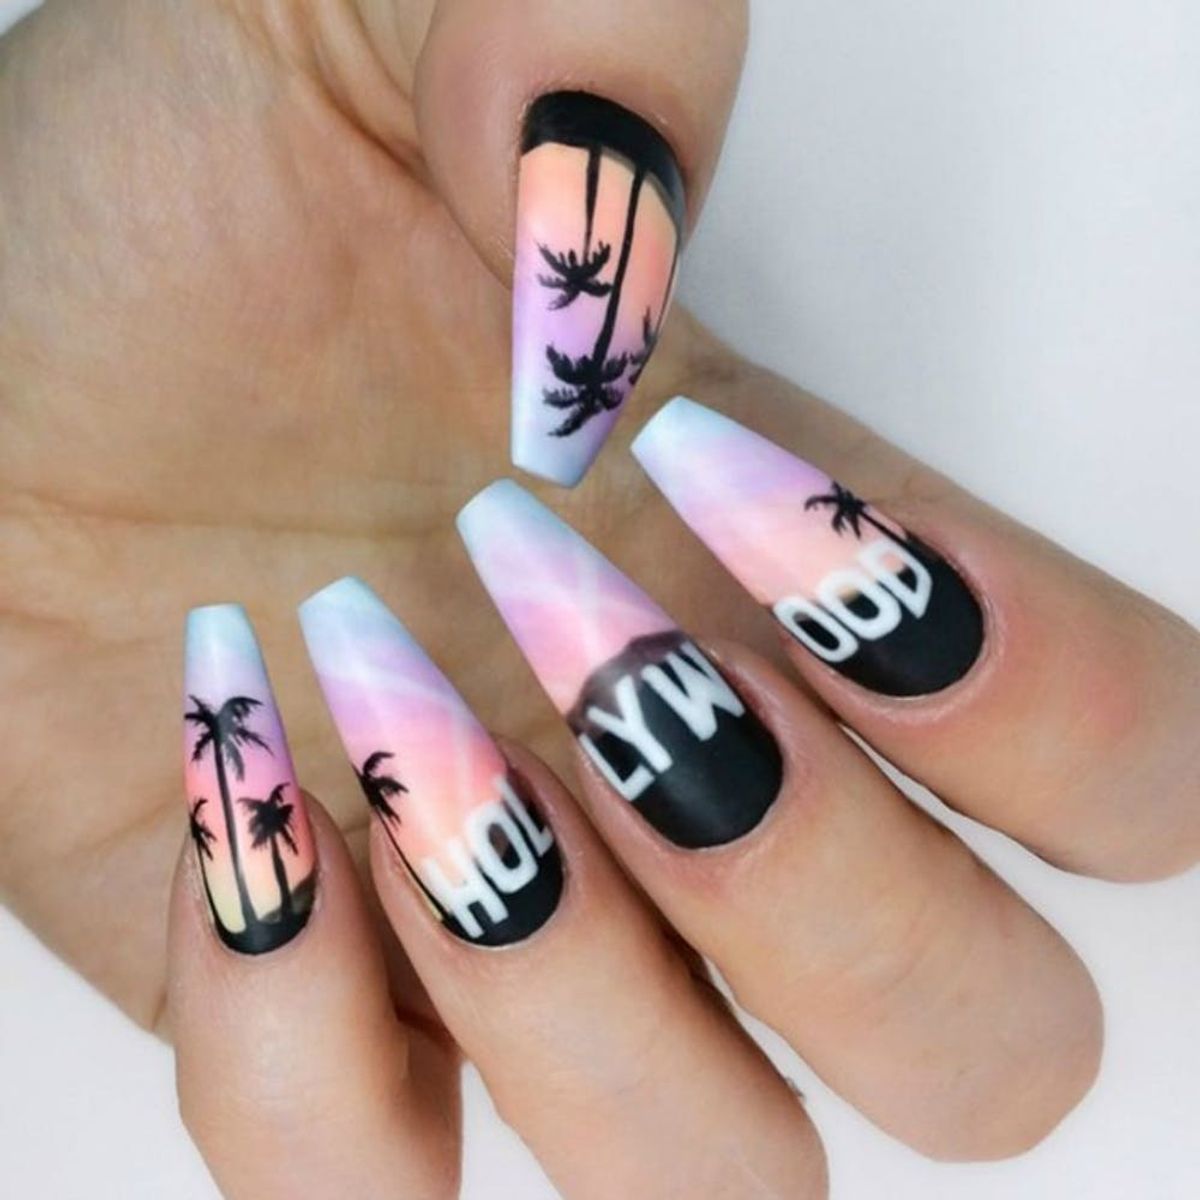 13 Reasons Why Coffin Nails Are the Hottest Mani Trend for Summer